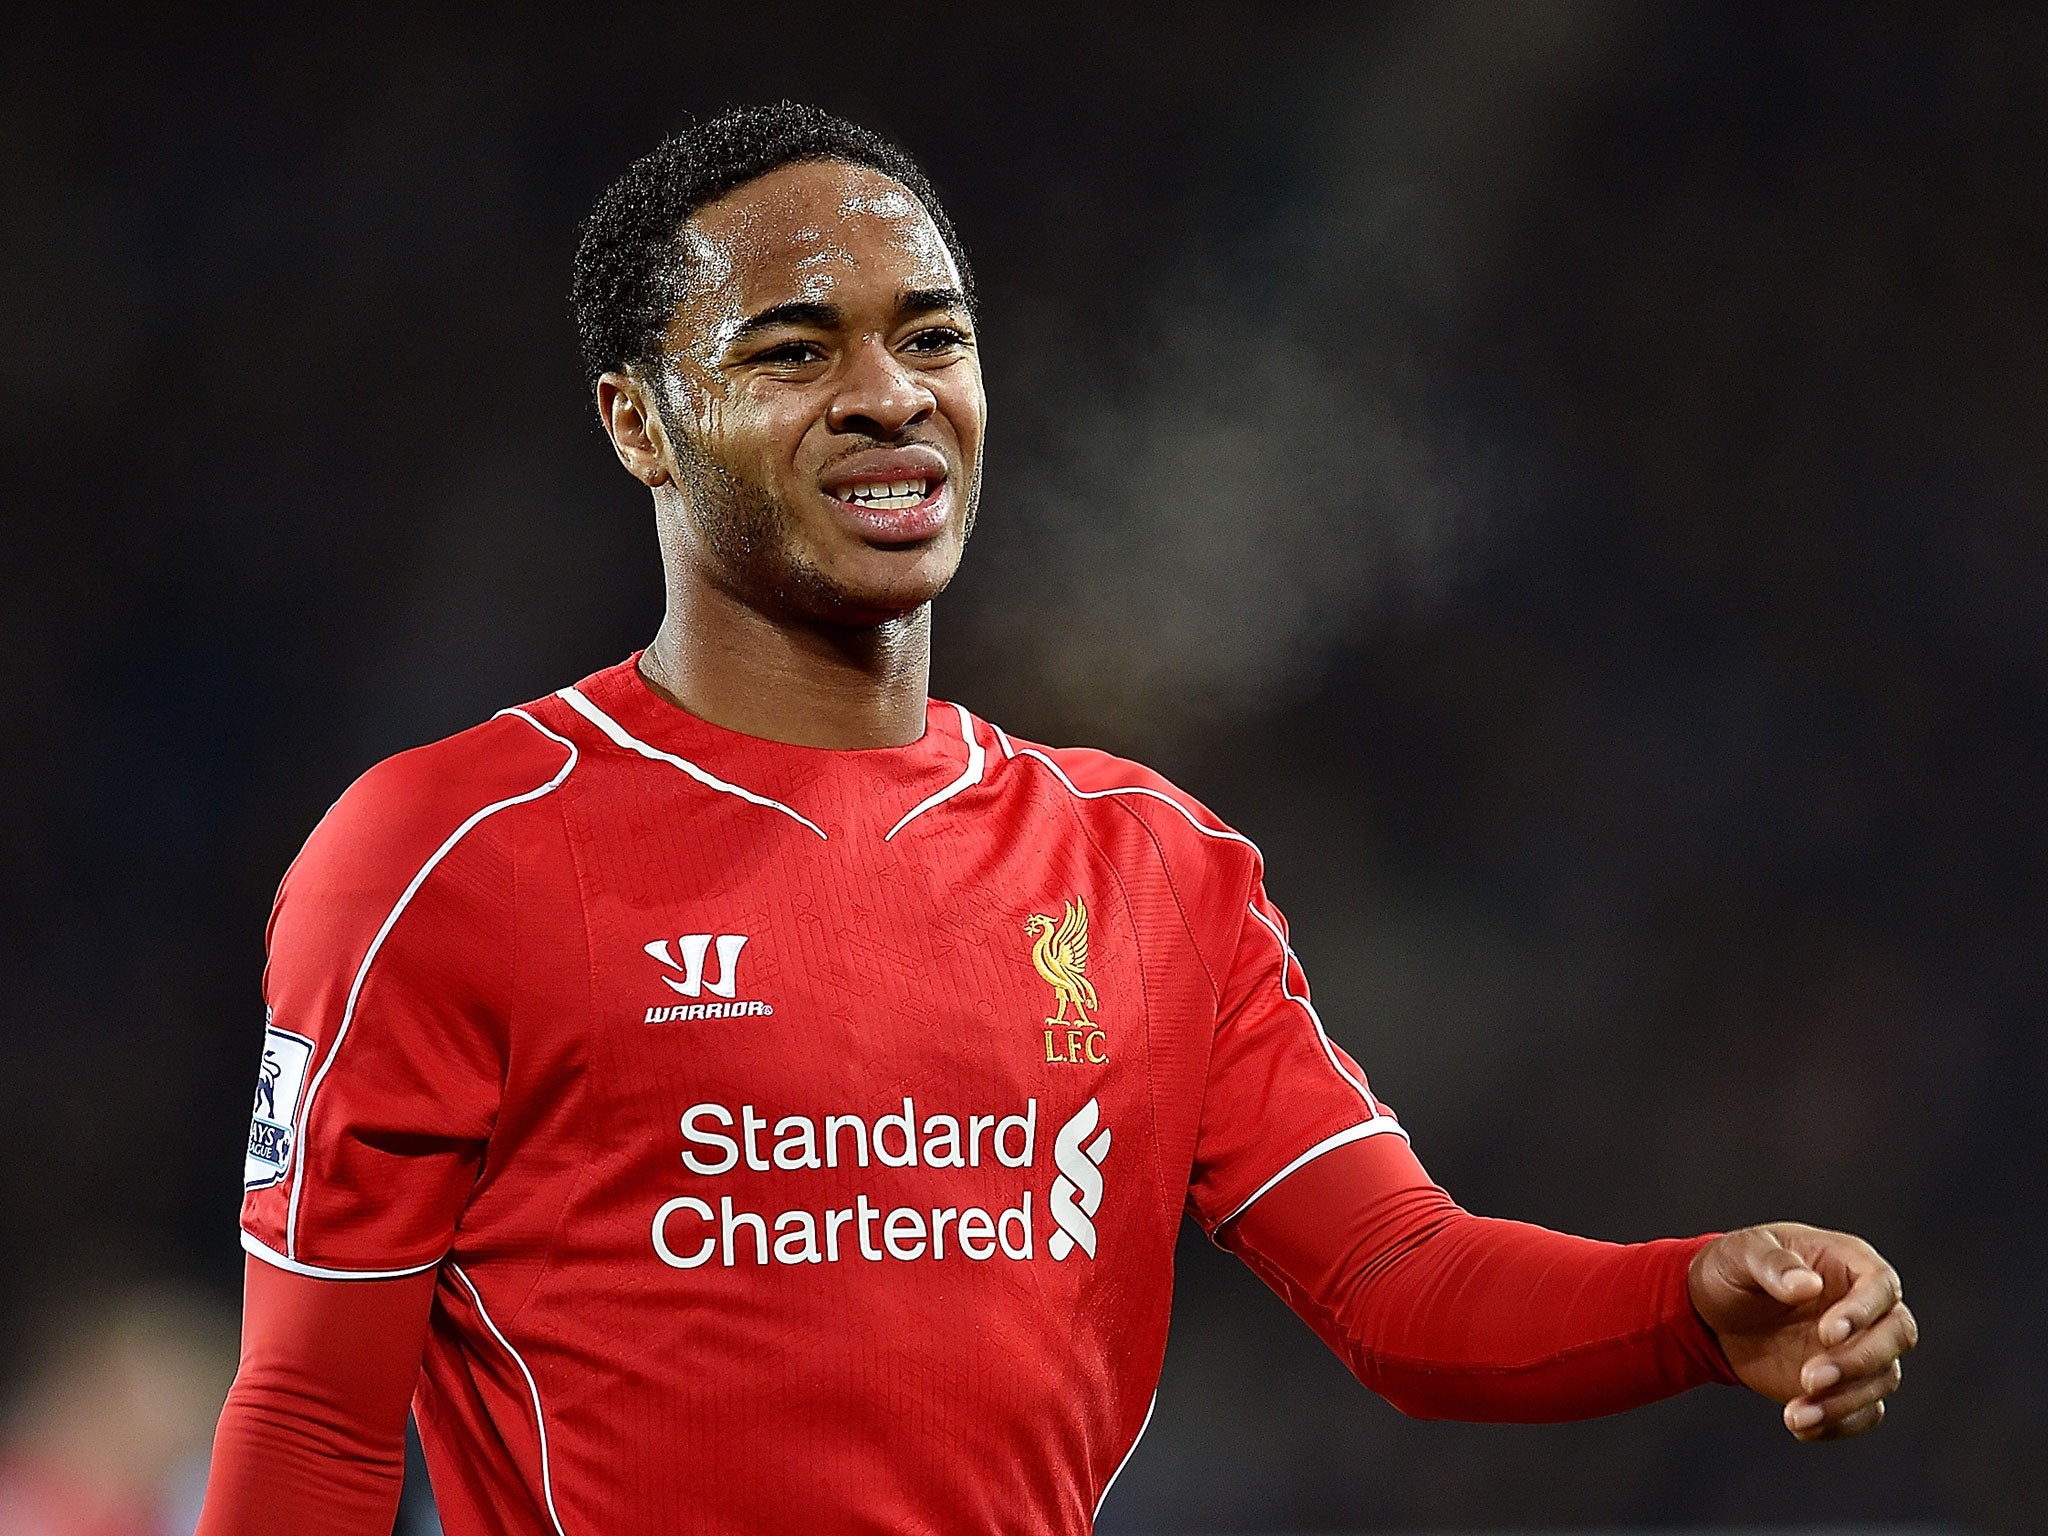 Raheem Sterling will miss tonight's game against Spurs